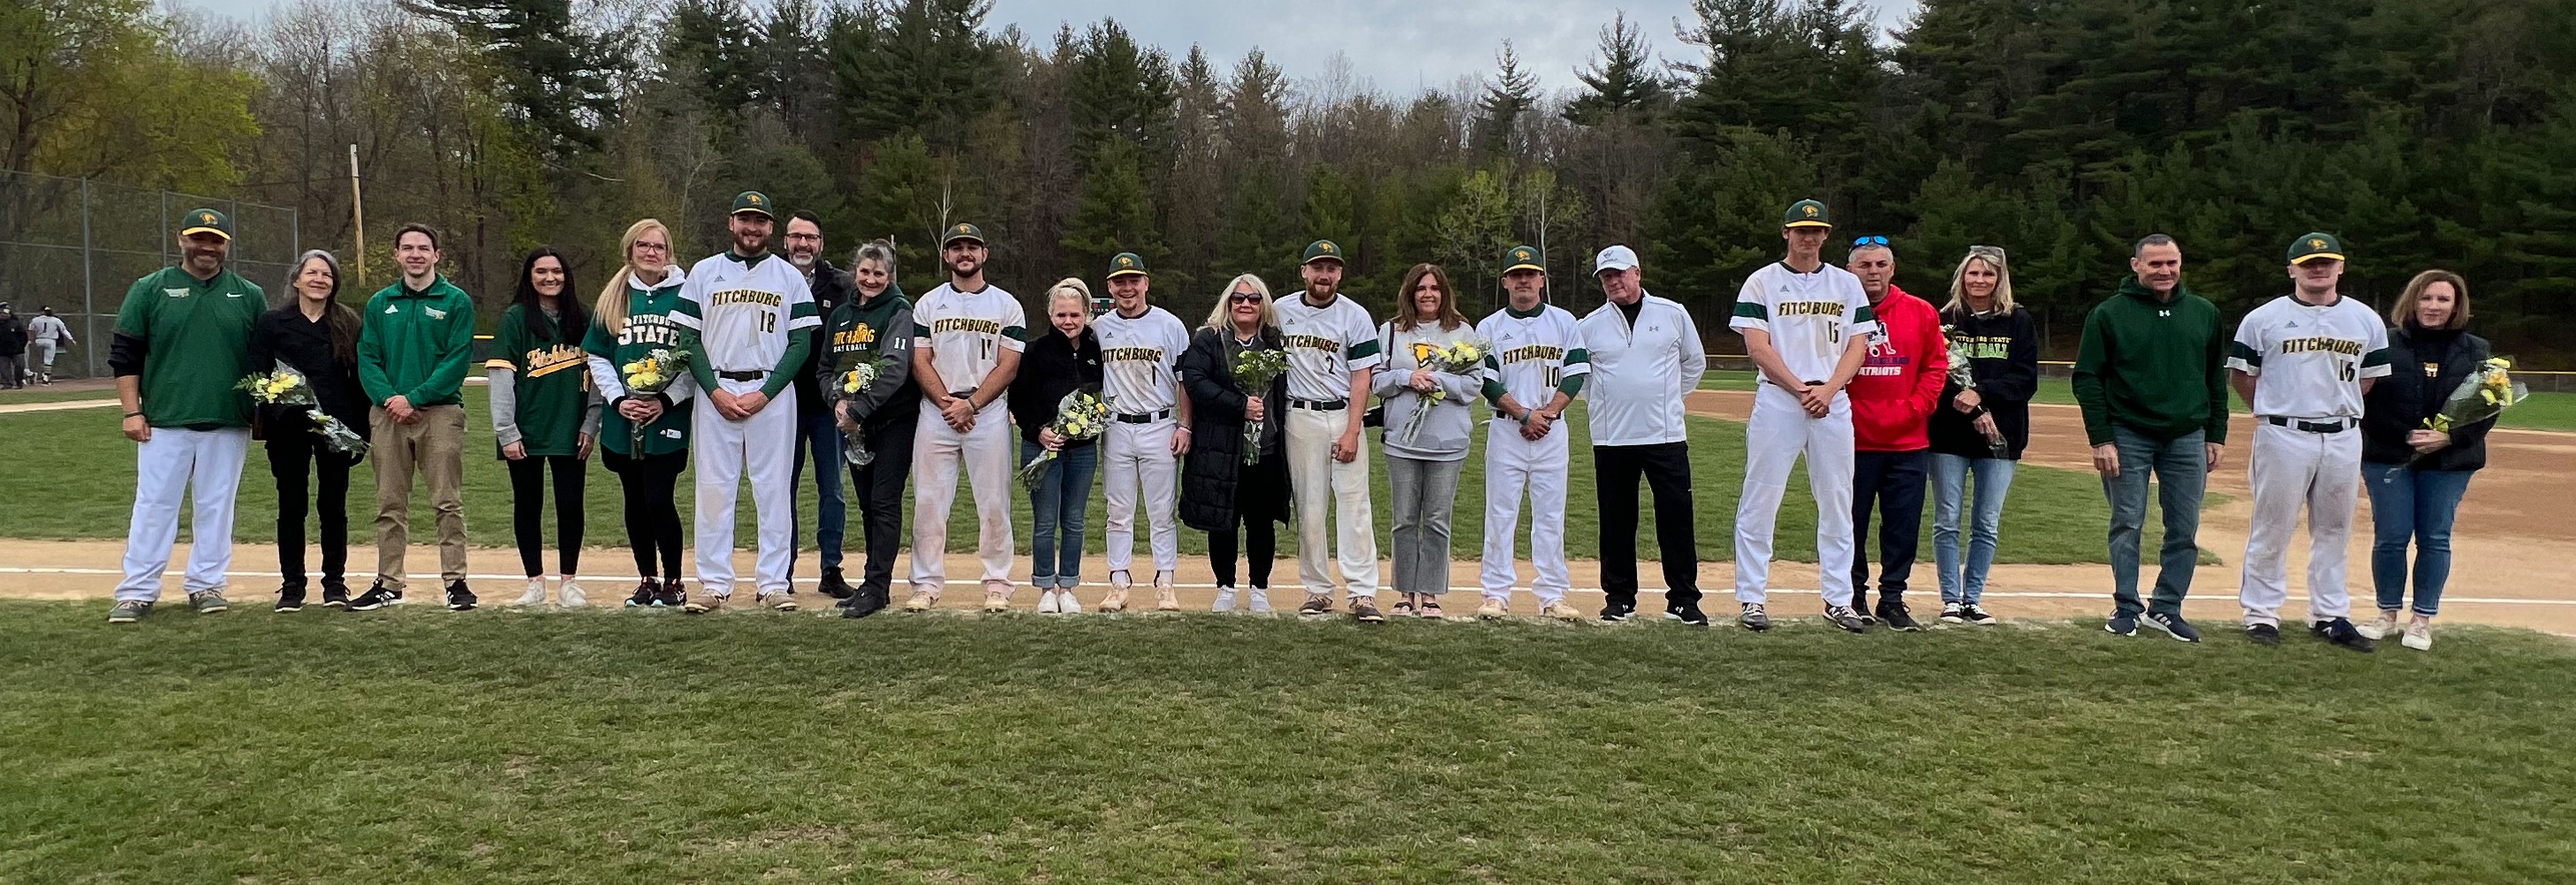 Falcons Split With Rams in MASCAC Twin Bill On Senior Day